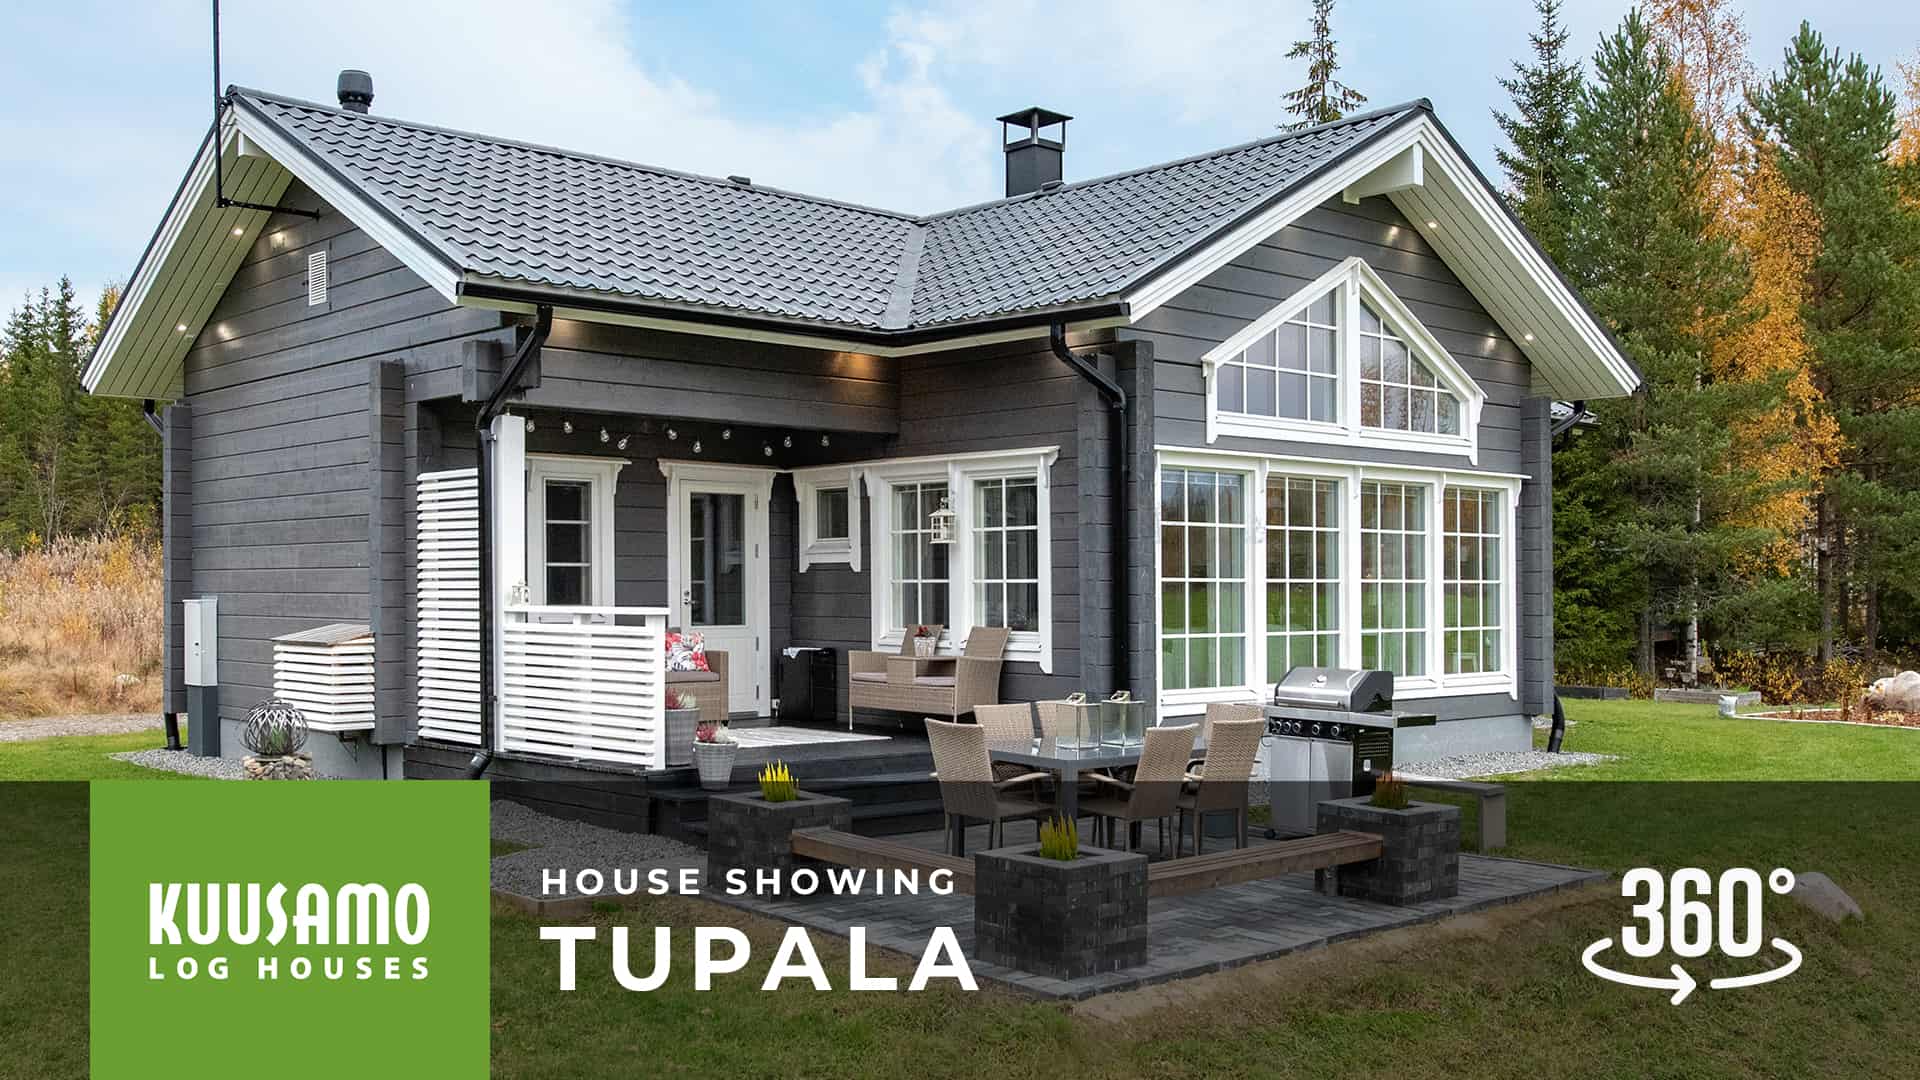 A Tupala 90 log home painted grey and depicted from the front.